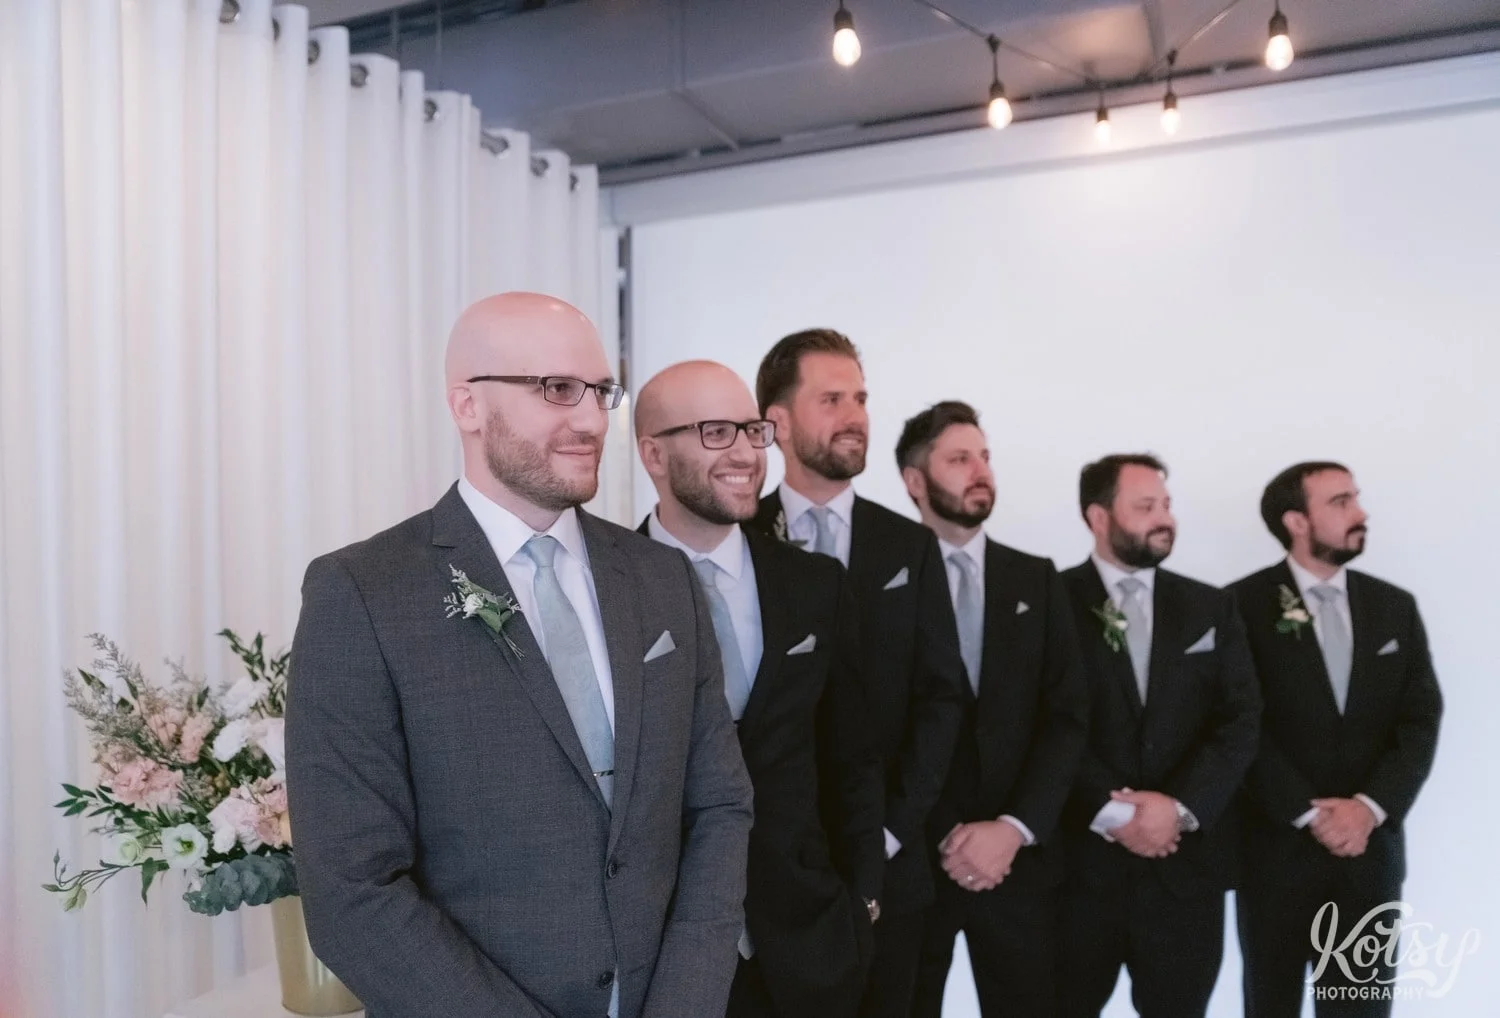 A groom wearing a gray suit and green tie looks off camera smiling with groomsmen behind them during his Second floor events wedding ceremony in Toronto Canada